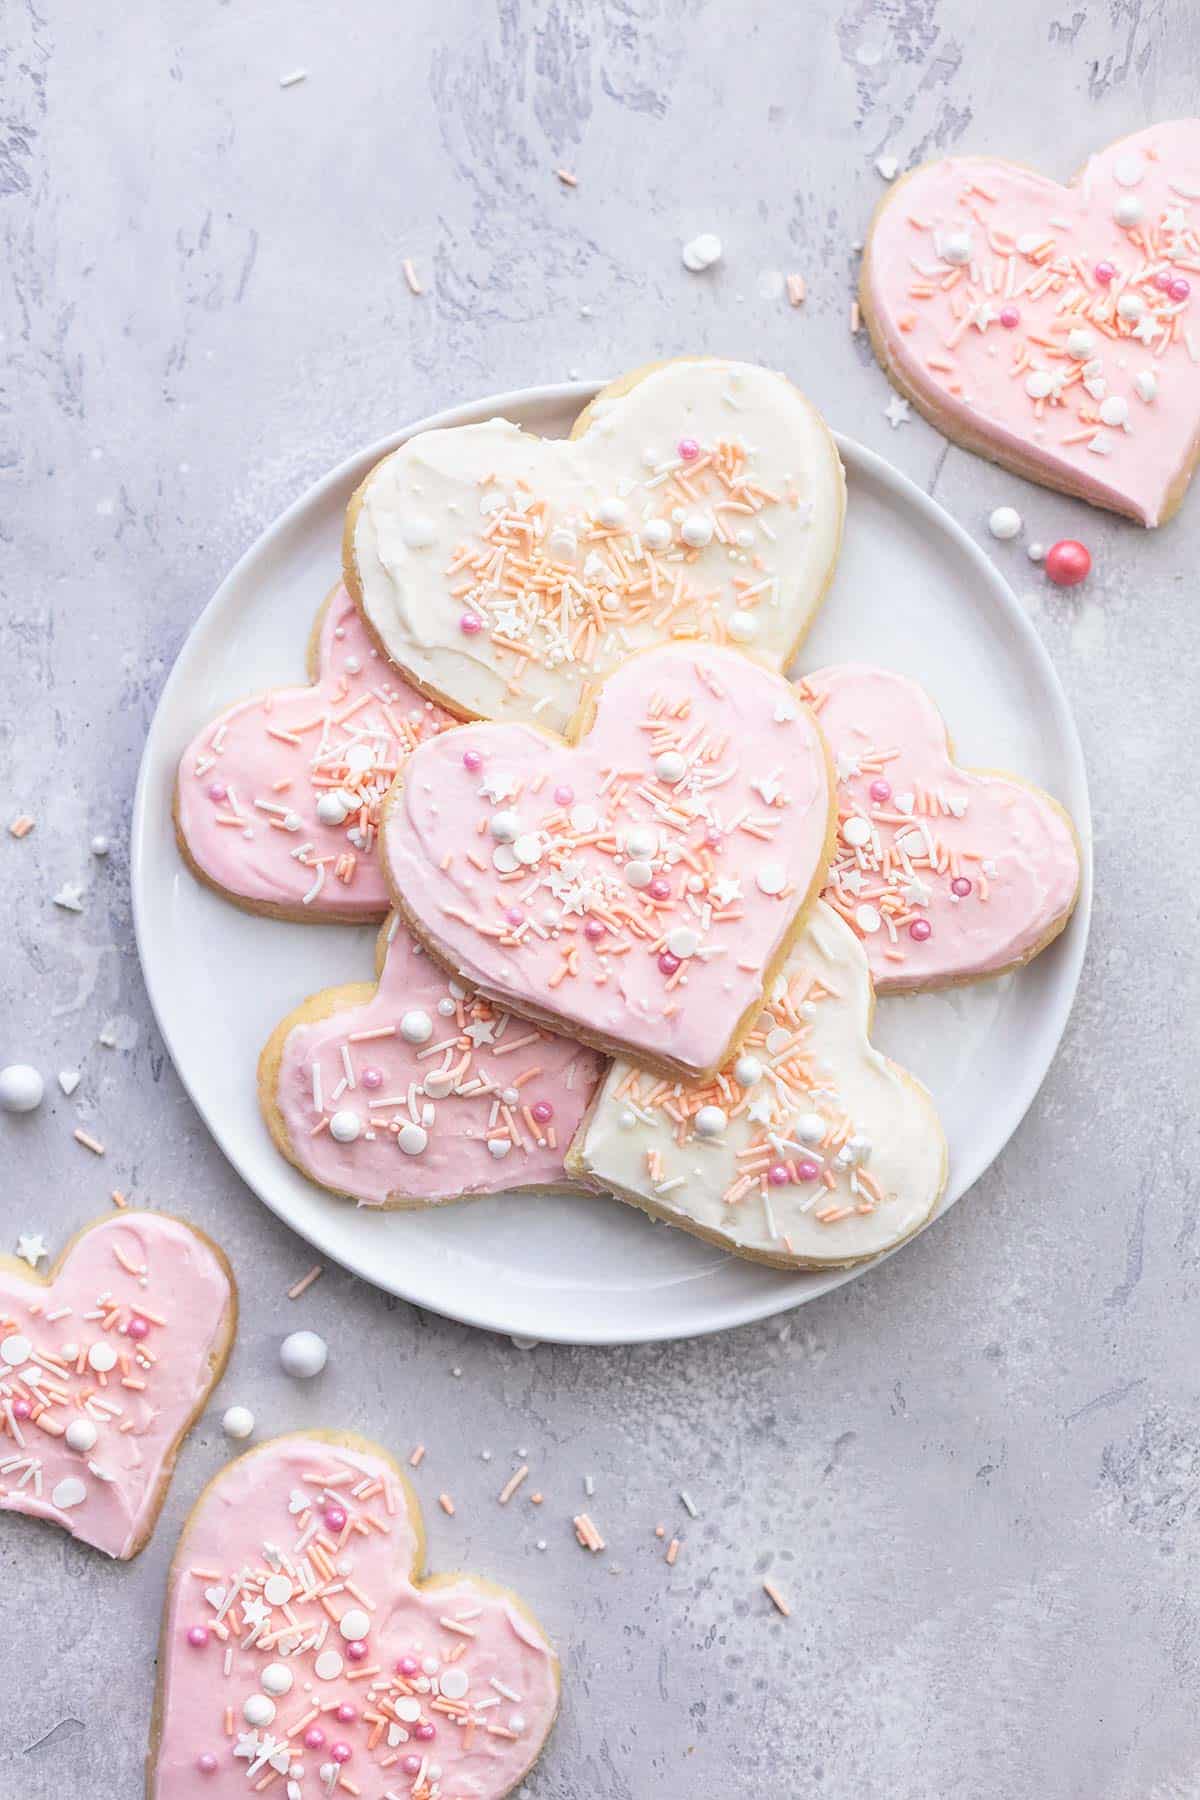 top view of heart shaped sugar cookies with sprinkles on a white plate with more cookies on the side.